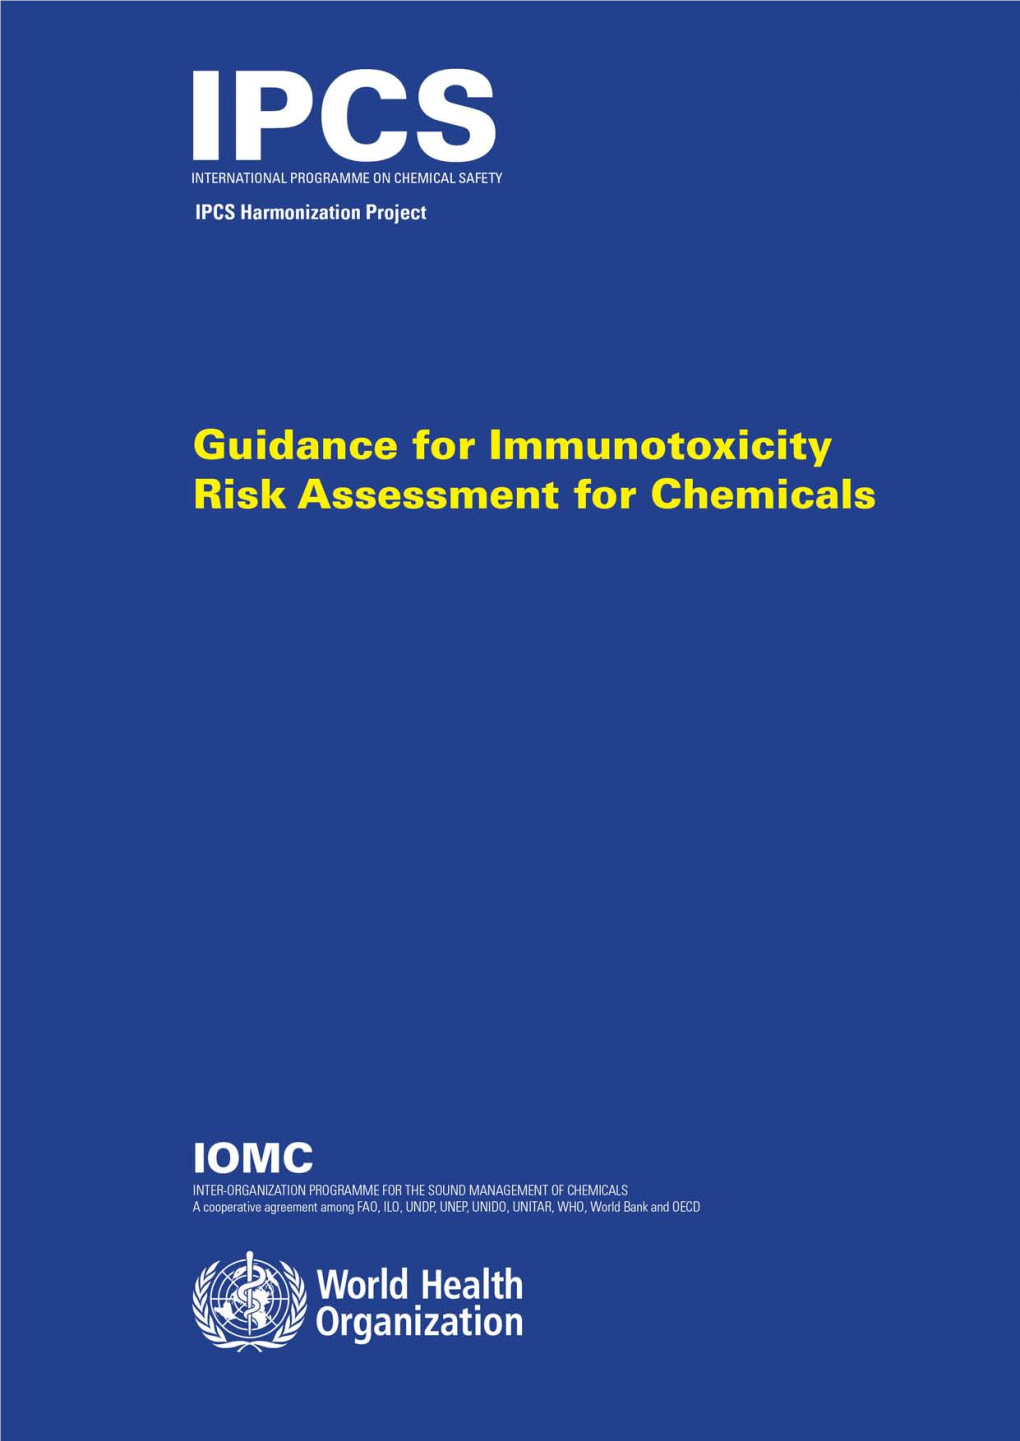 Guidance for Immunotoxicity Risk Assessment for Chemicals